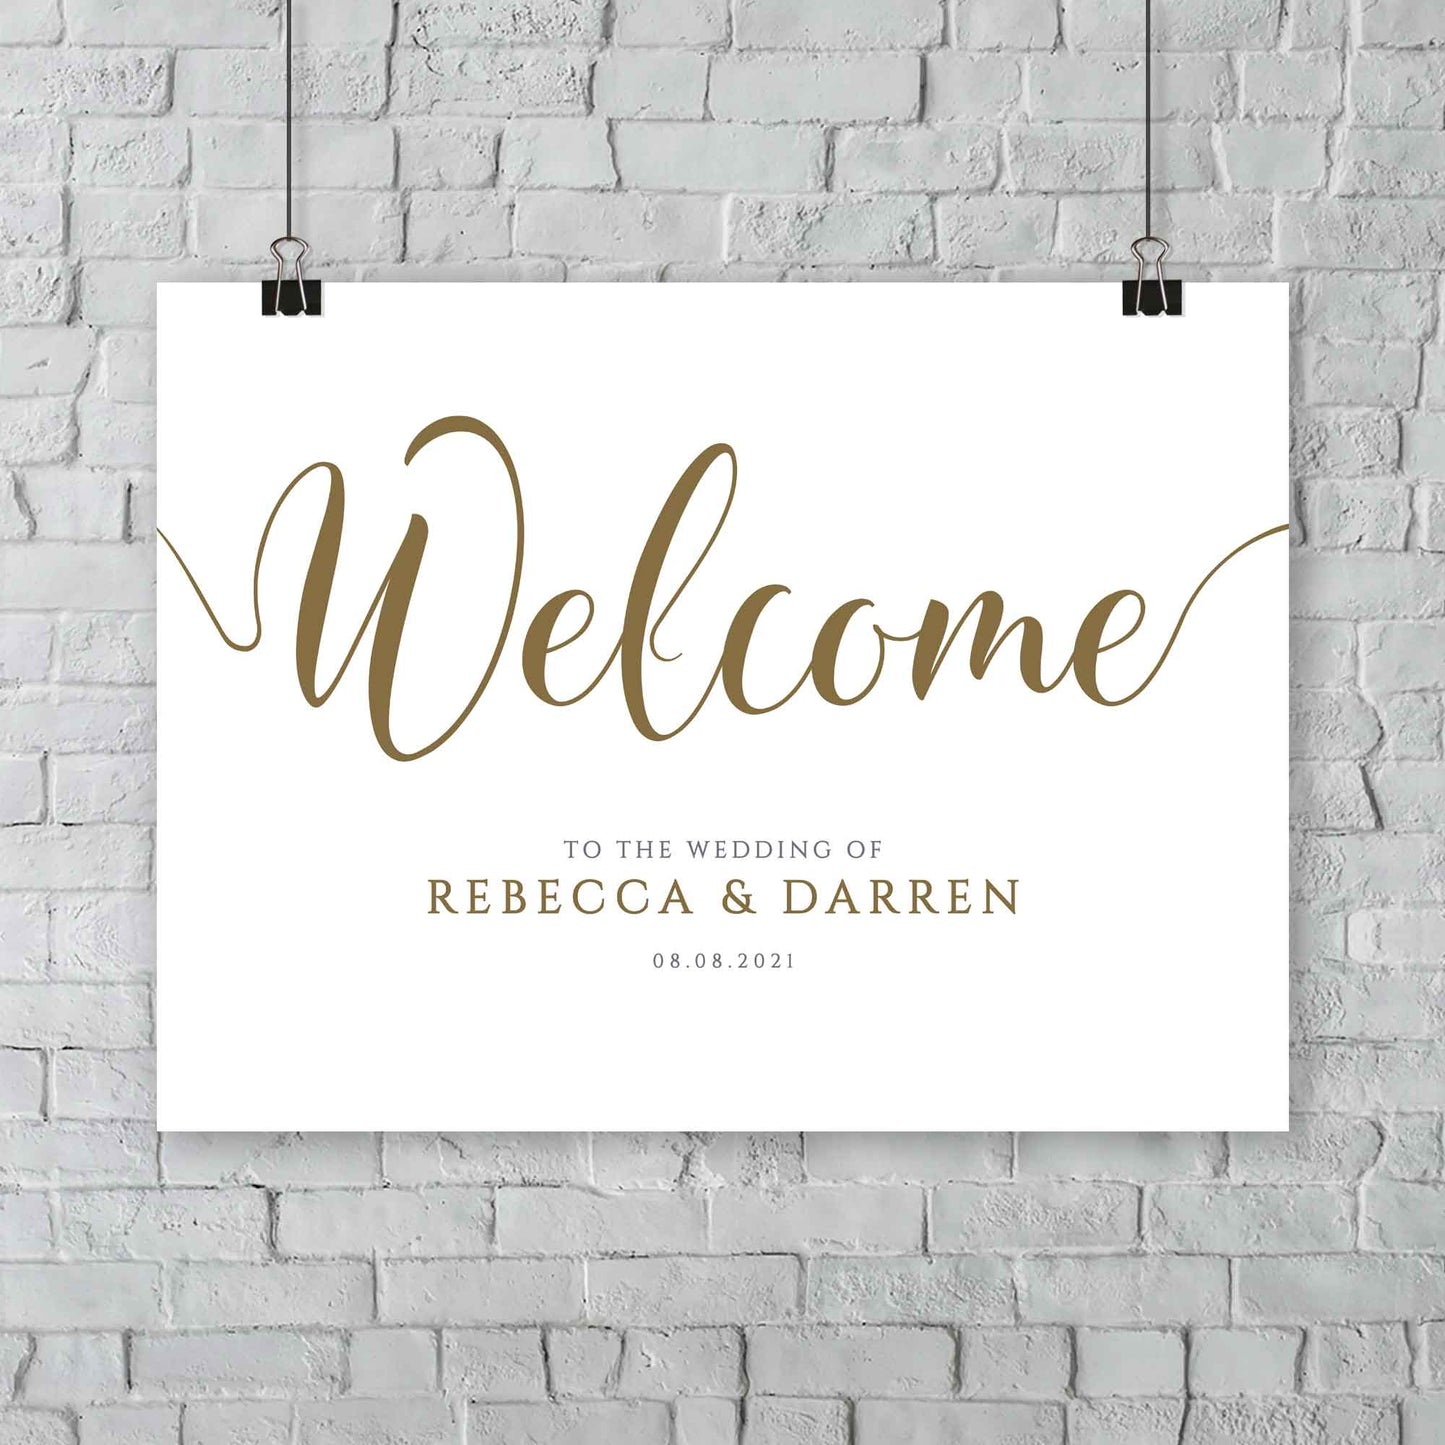 Gold Welcome Sign with editable bride and groom names and date of wedding